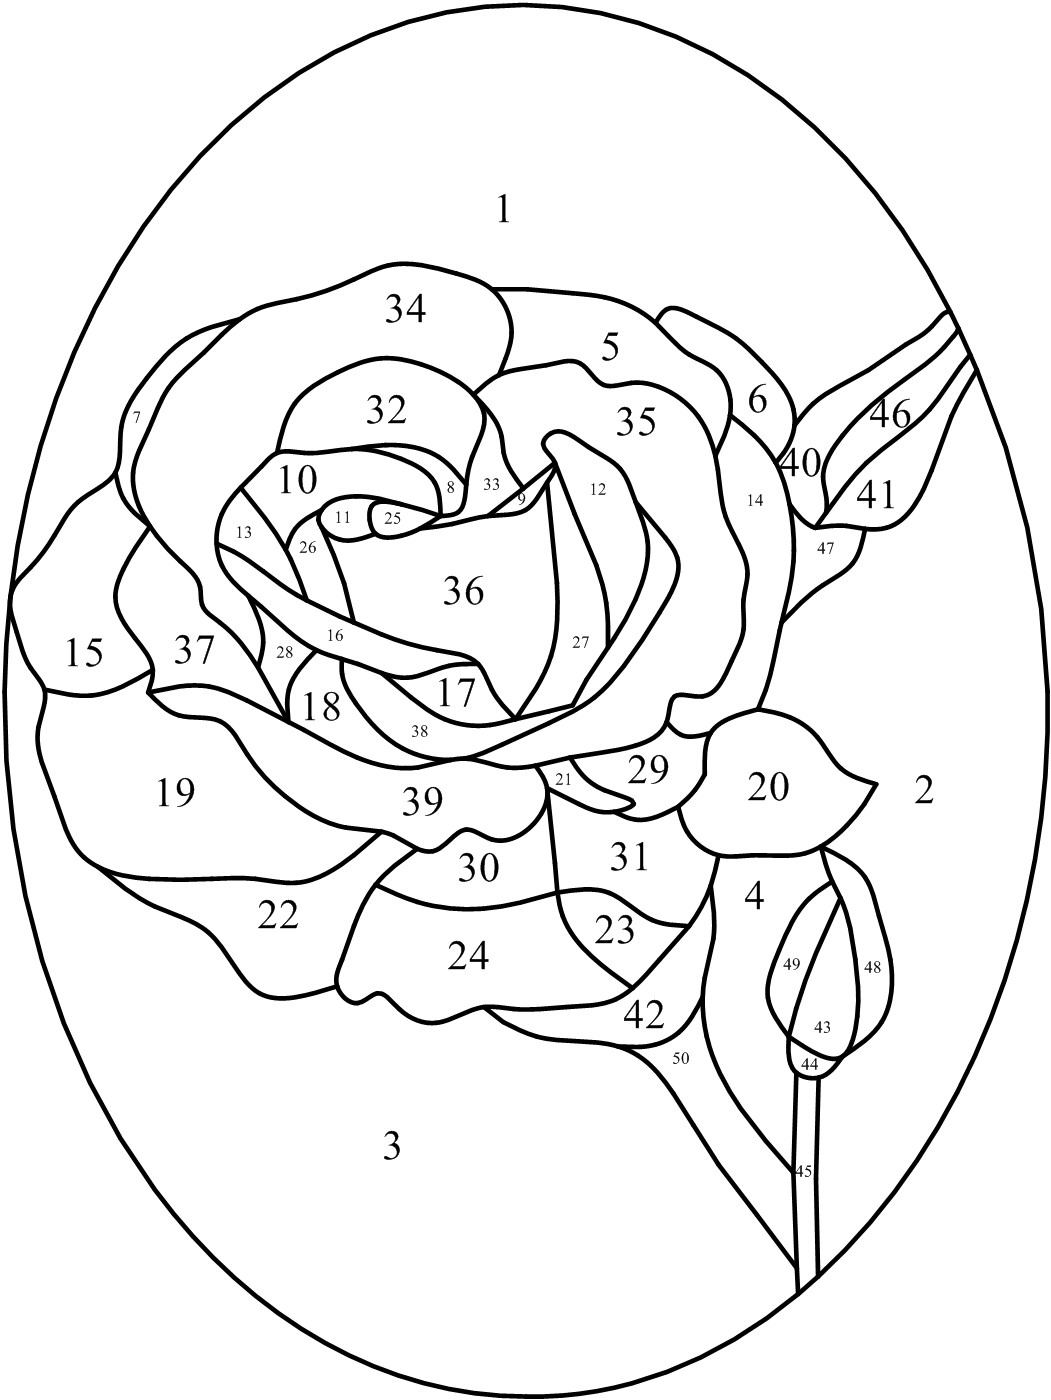 Rose Heart Stained Glass Pattern and Rose Heart Applique Pattern